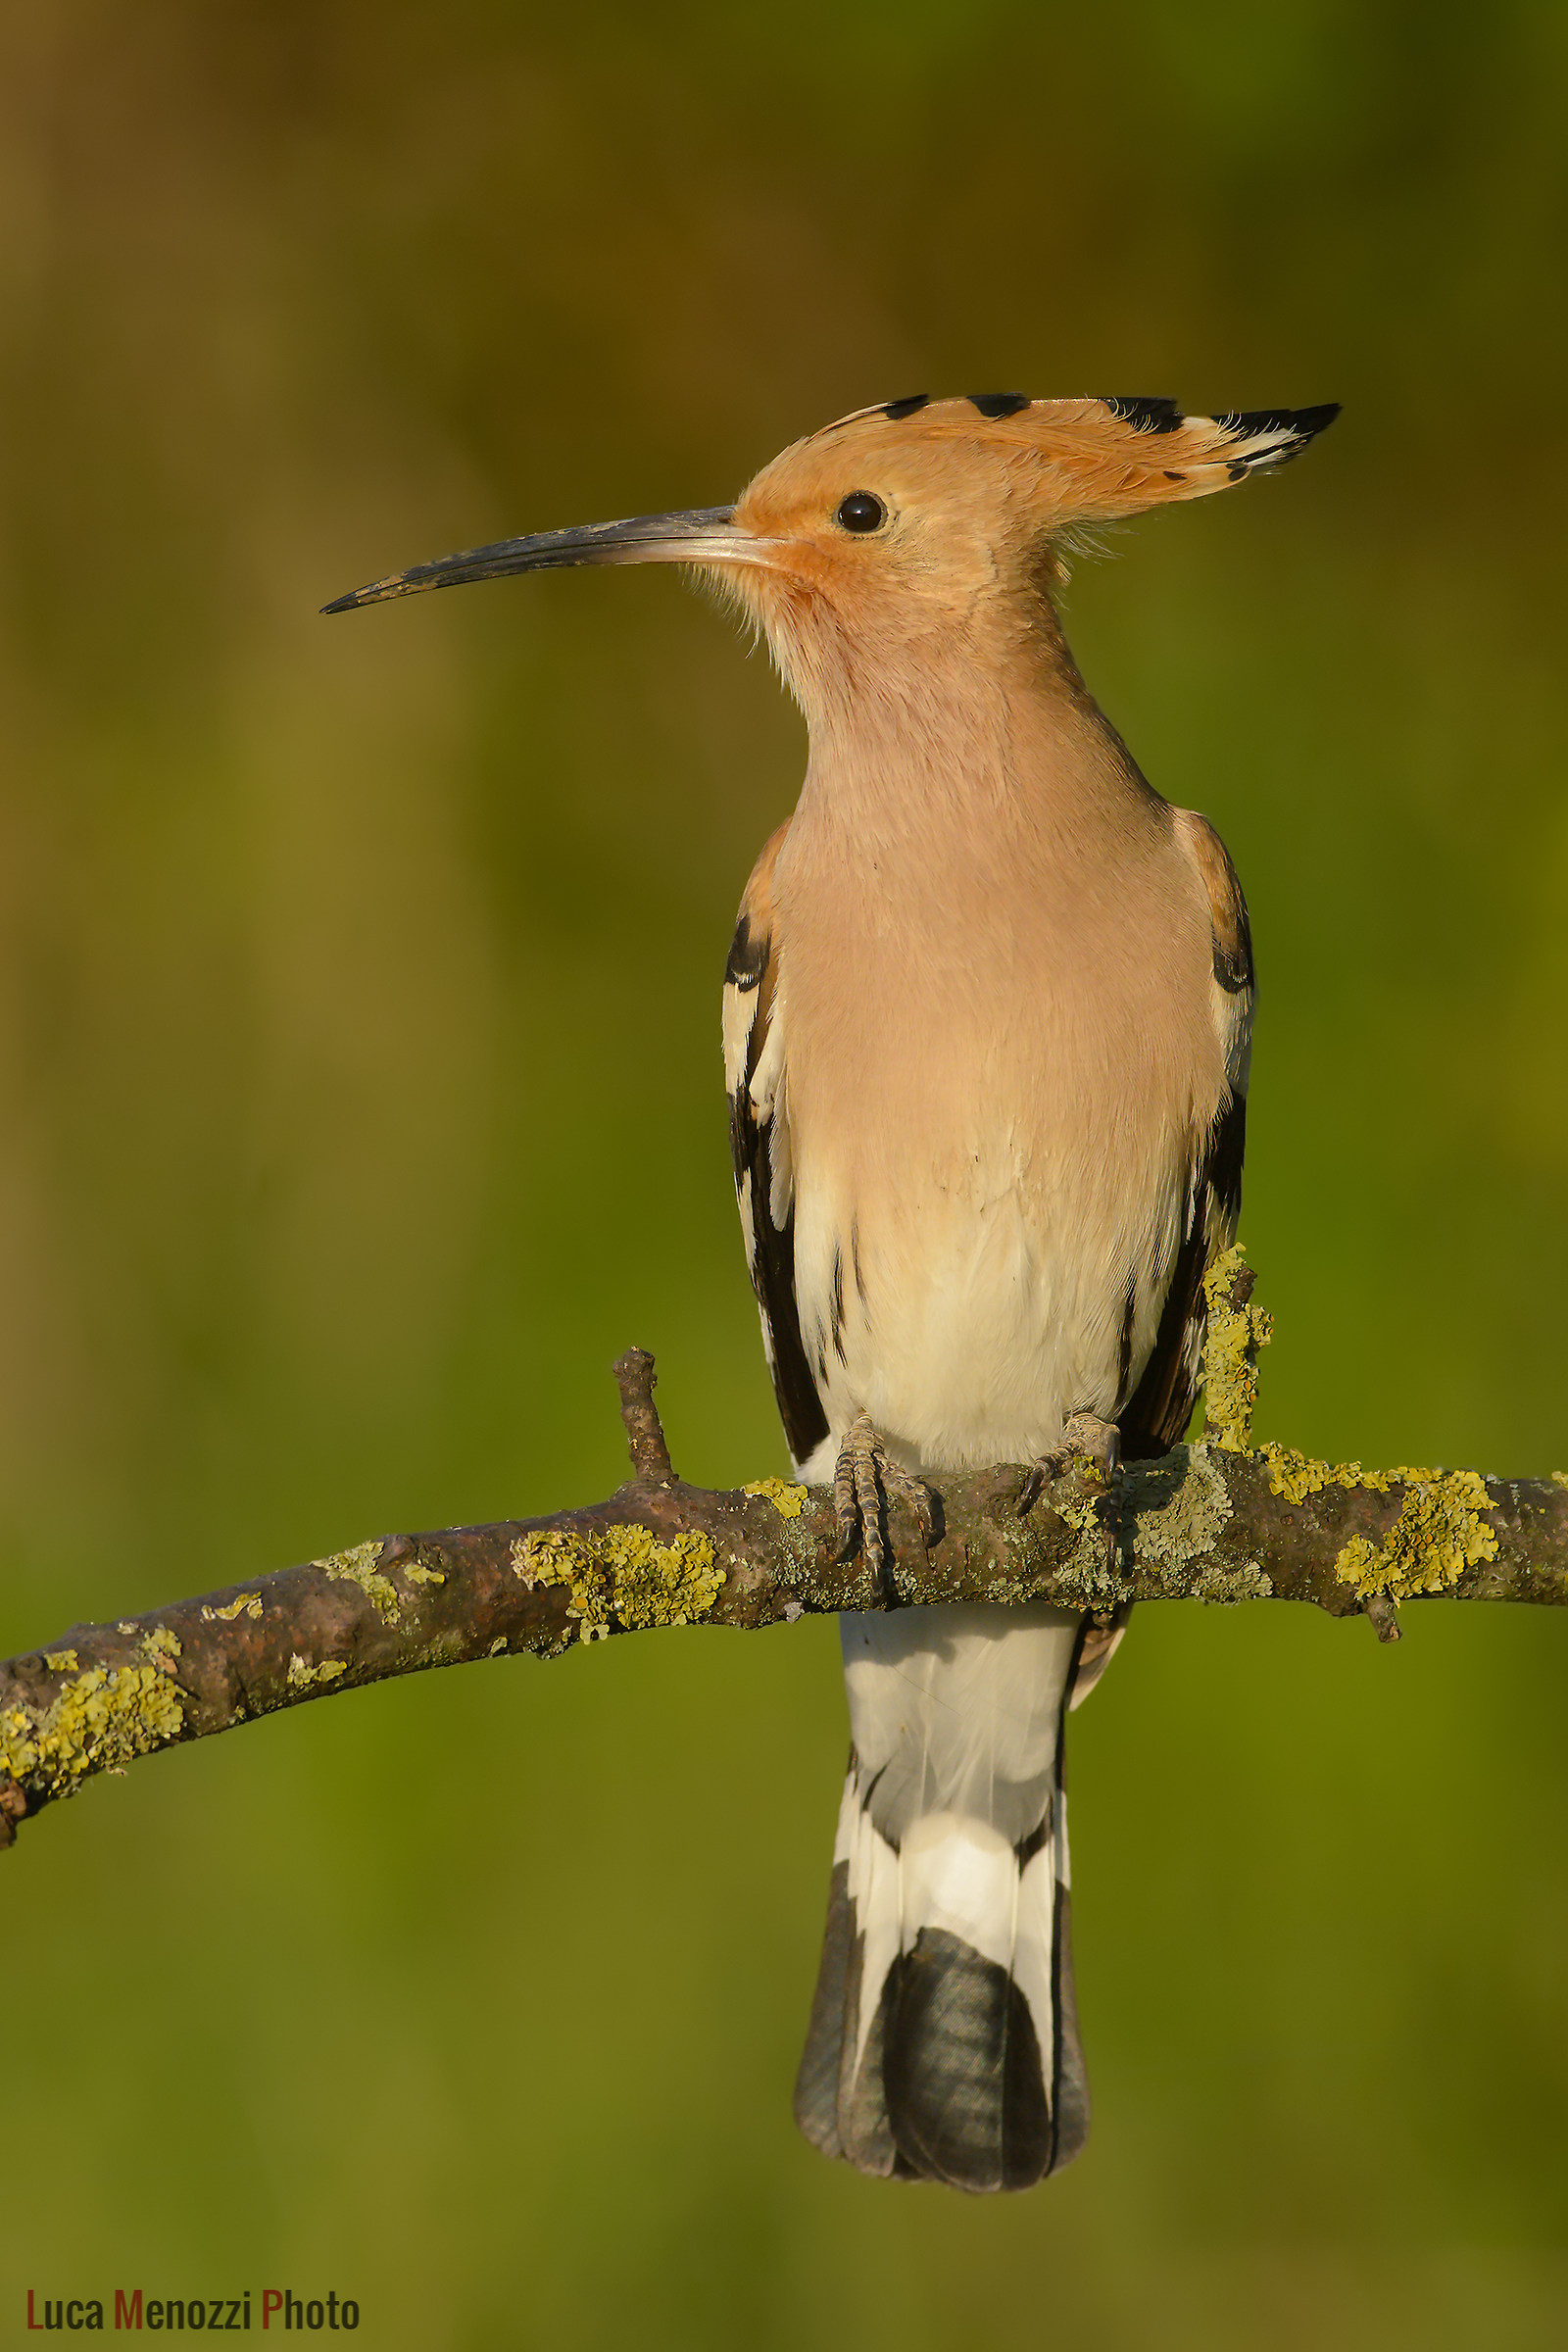 Hoopoe at sunset...